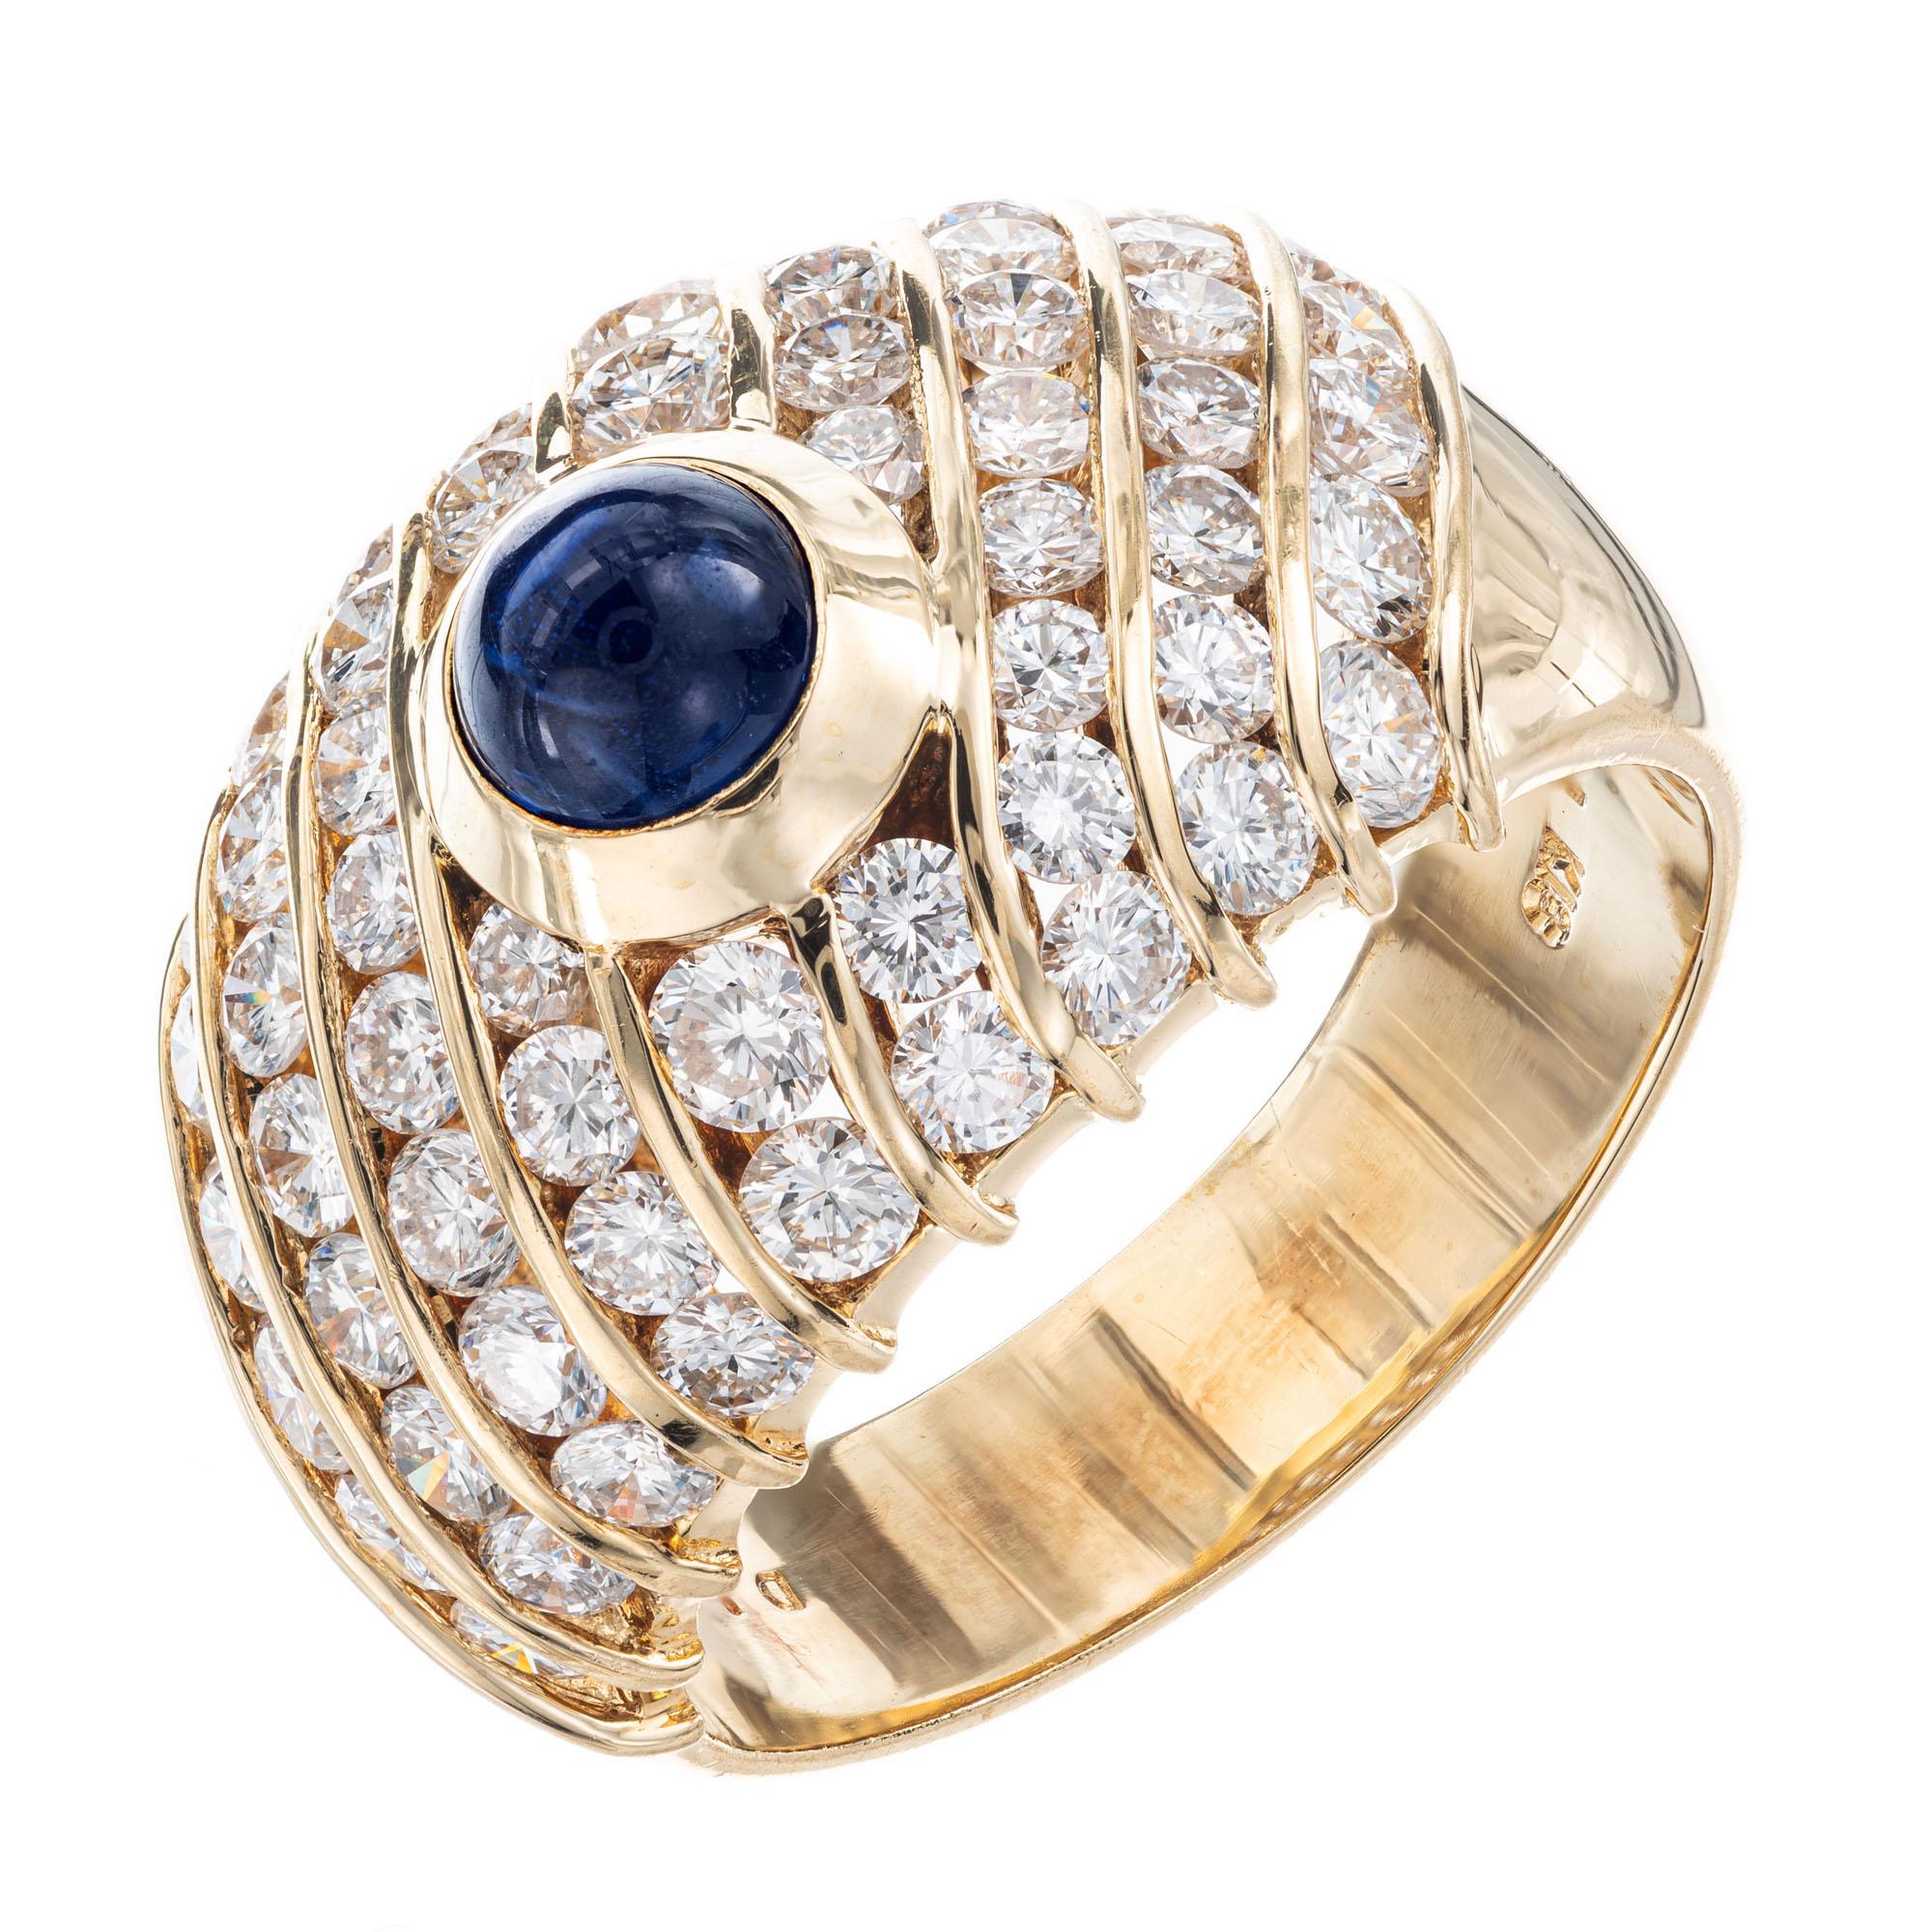 Diamond and sapphire cocktail ring. GIA certified center cabochon center sapphire with 56 full cut round diamonds in a 18k yellow gold cluster setting. 

CMT Type 1 natural Sapphire simple heat only, one cabochon gem blue Sapphire, approx. total